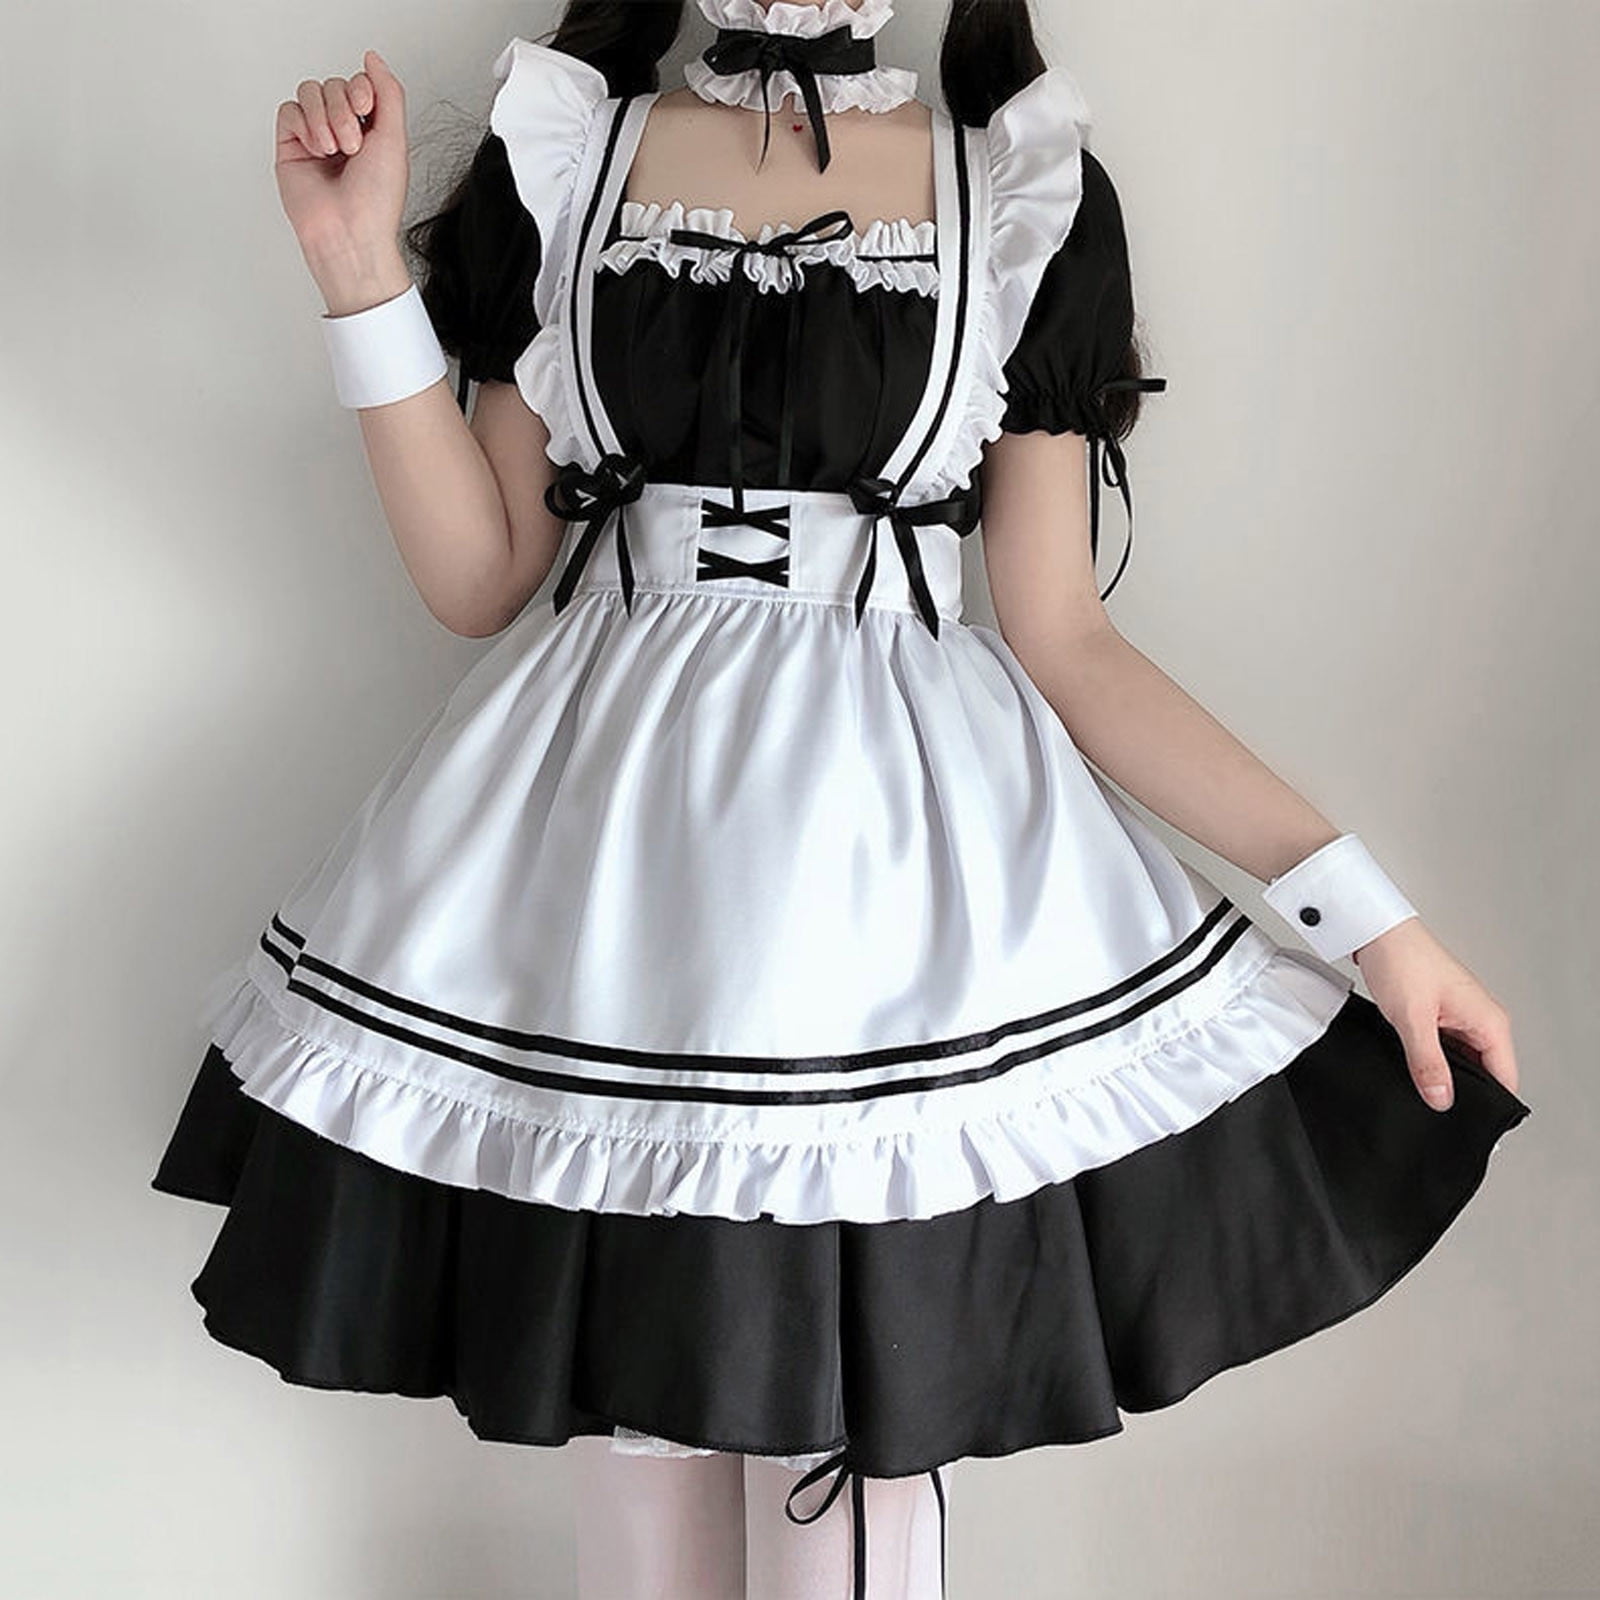 Japan Anime Cosplay Fashion Asian Girl Stock Image  Image of hairstyle  asia 129278285